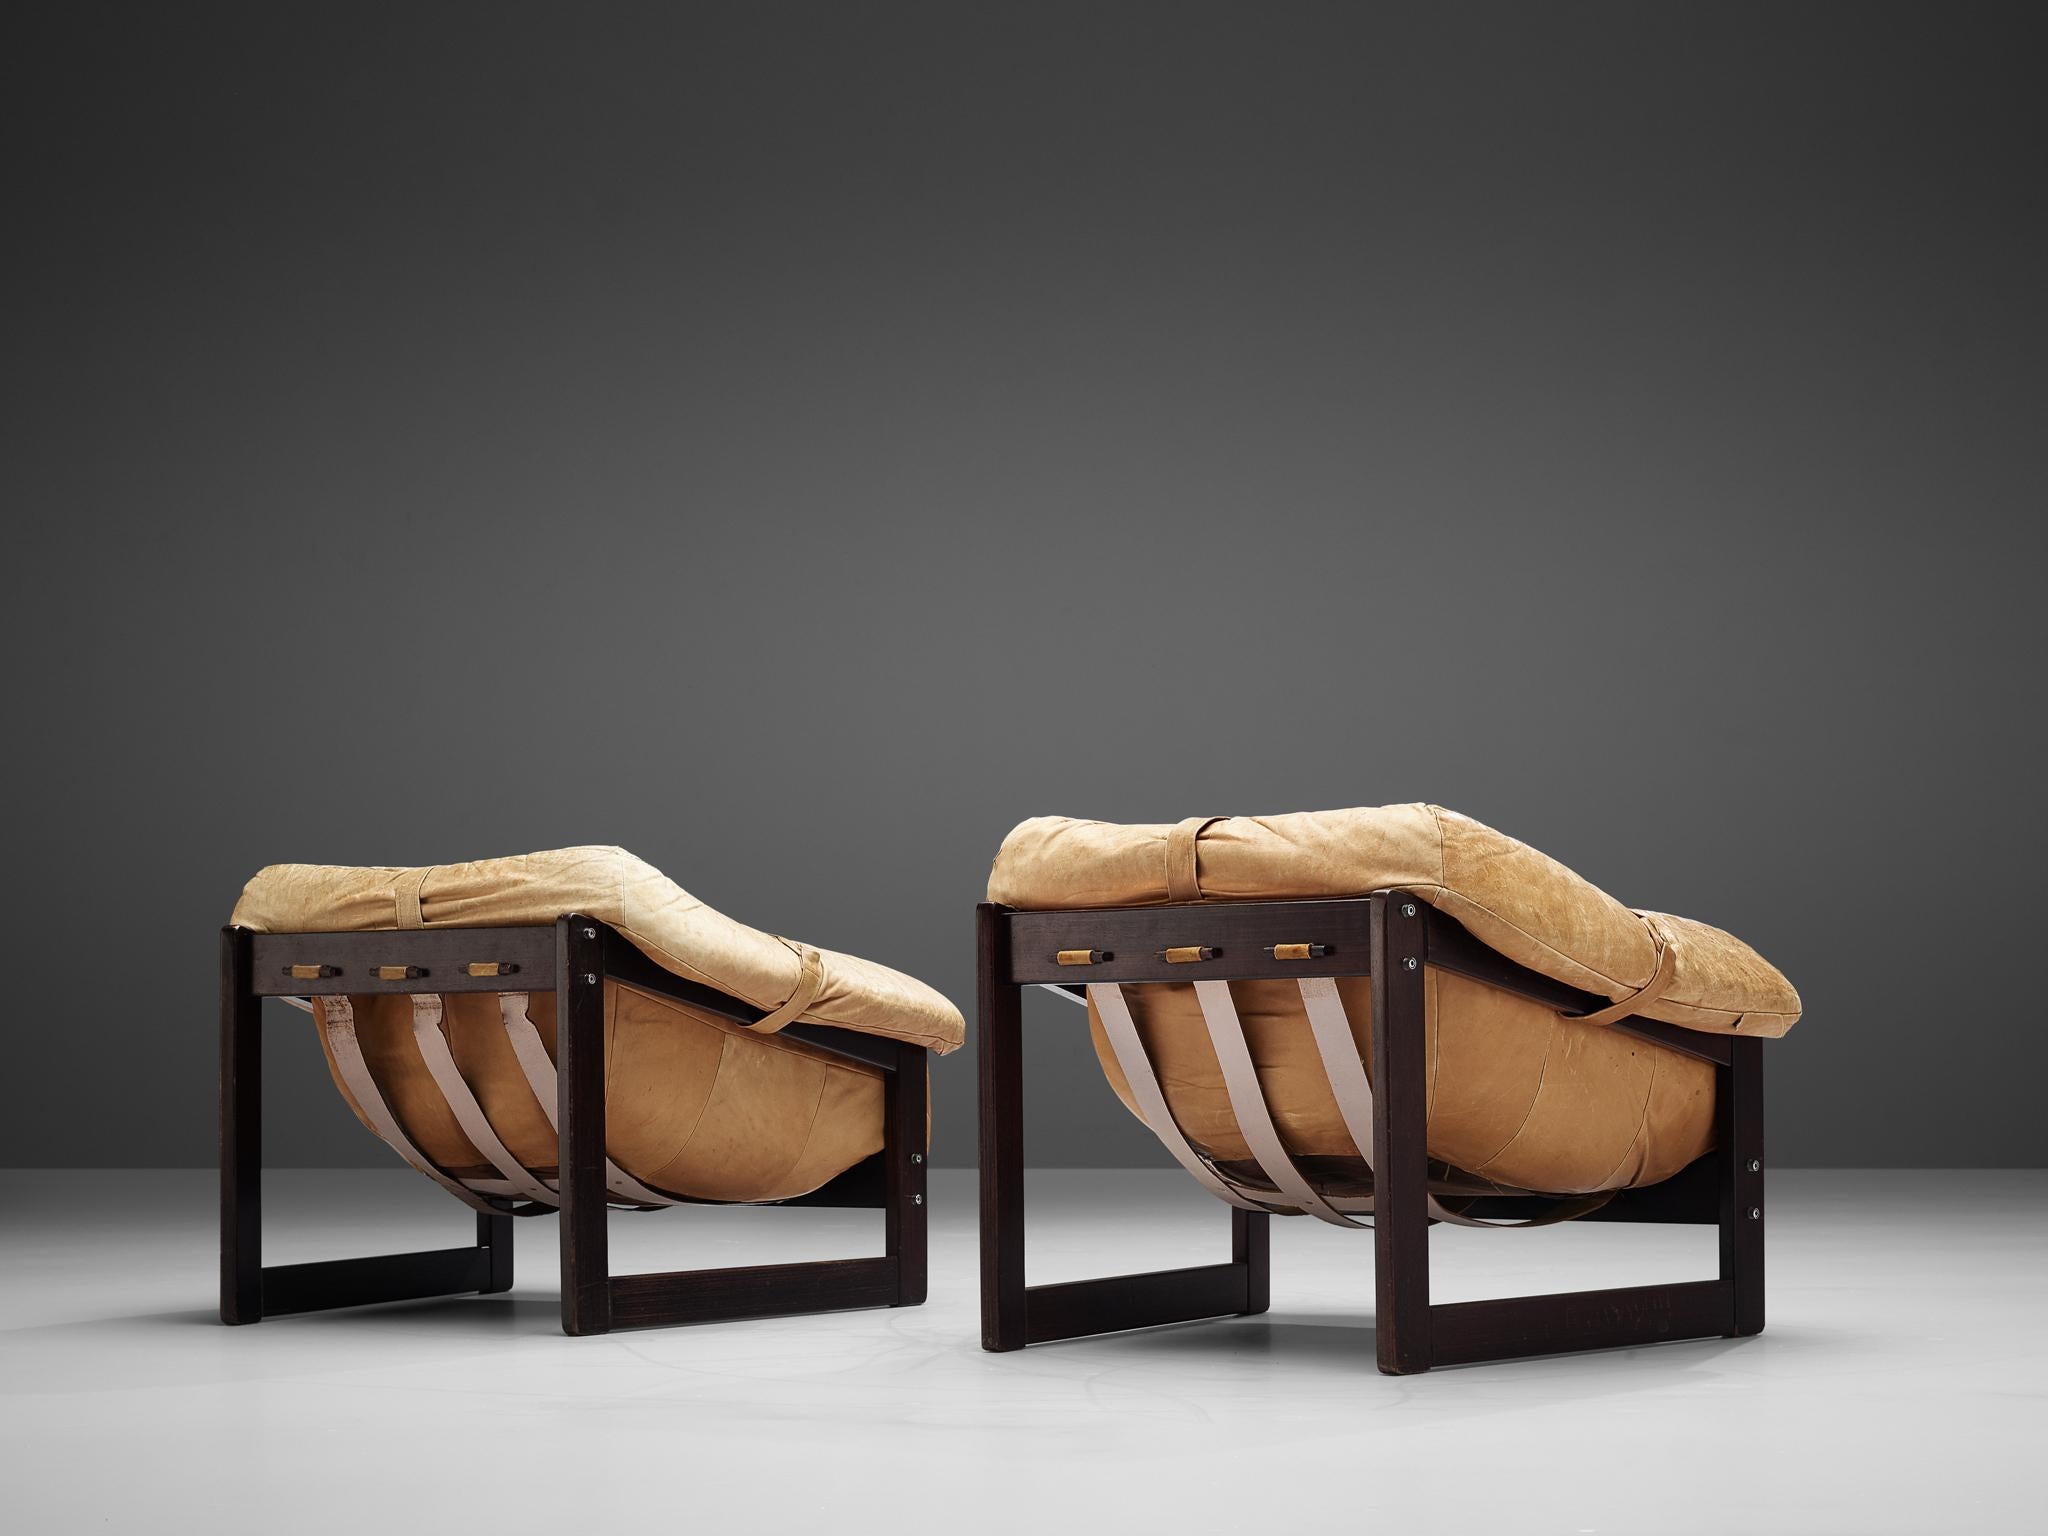 Brazilian Pair of Percival Lafer 'MP-091' Lounge Chairs in Cognac Leather